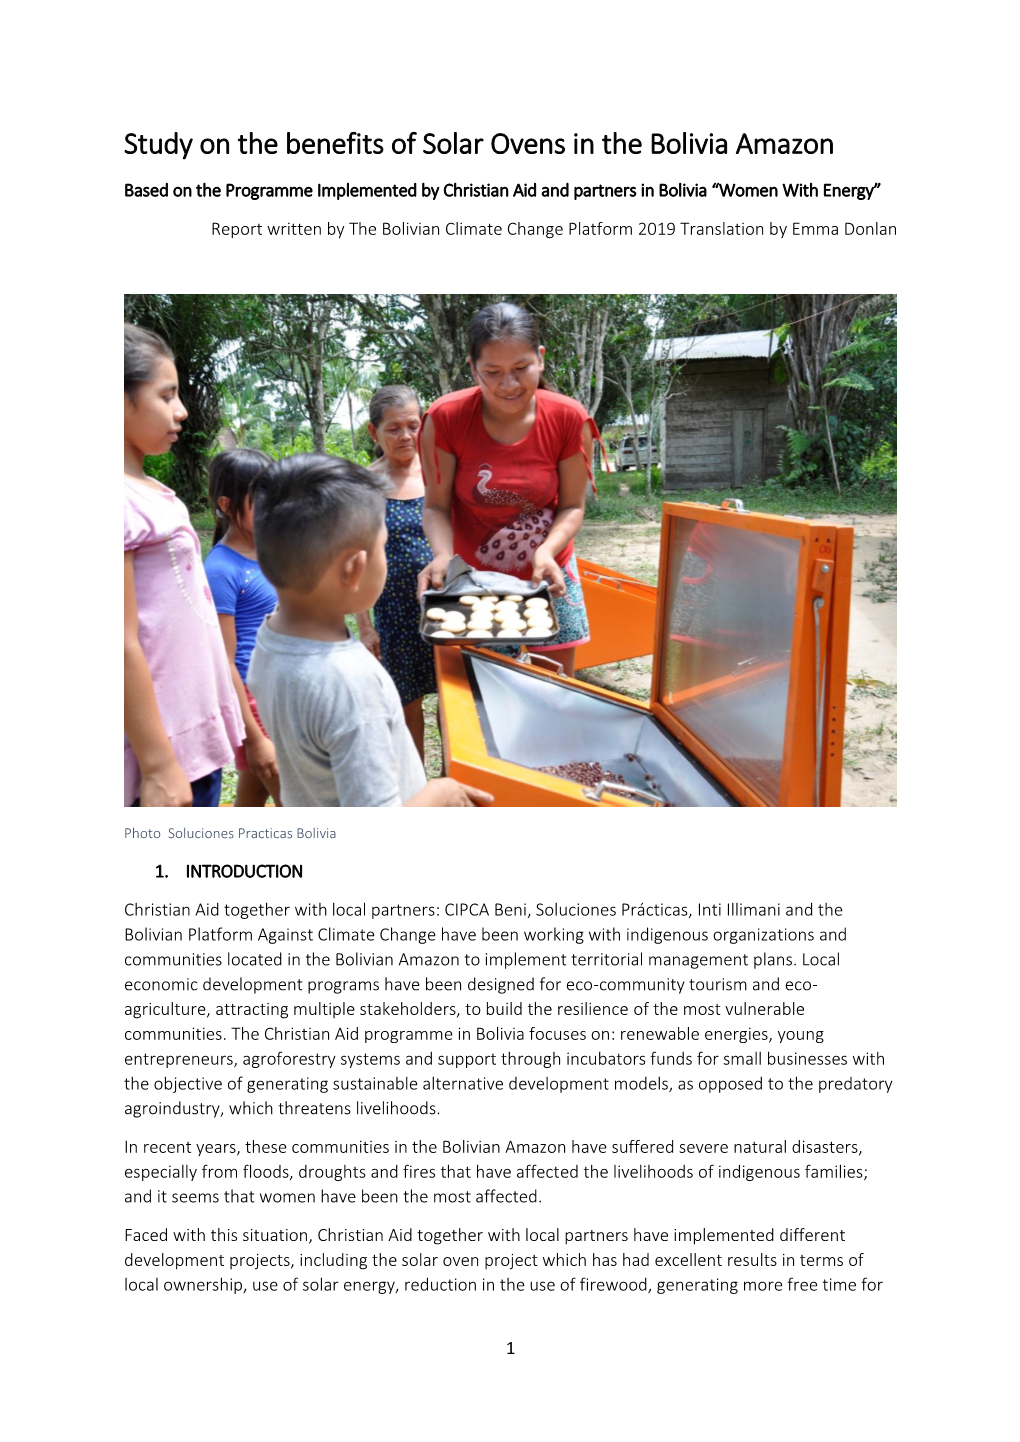 Study on the Benefits of Solar Ovens in the Bolivia Amazon